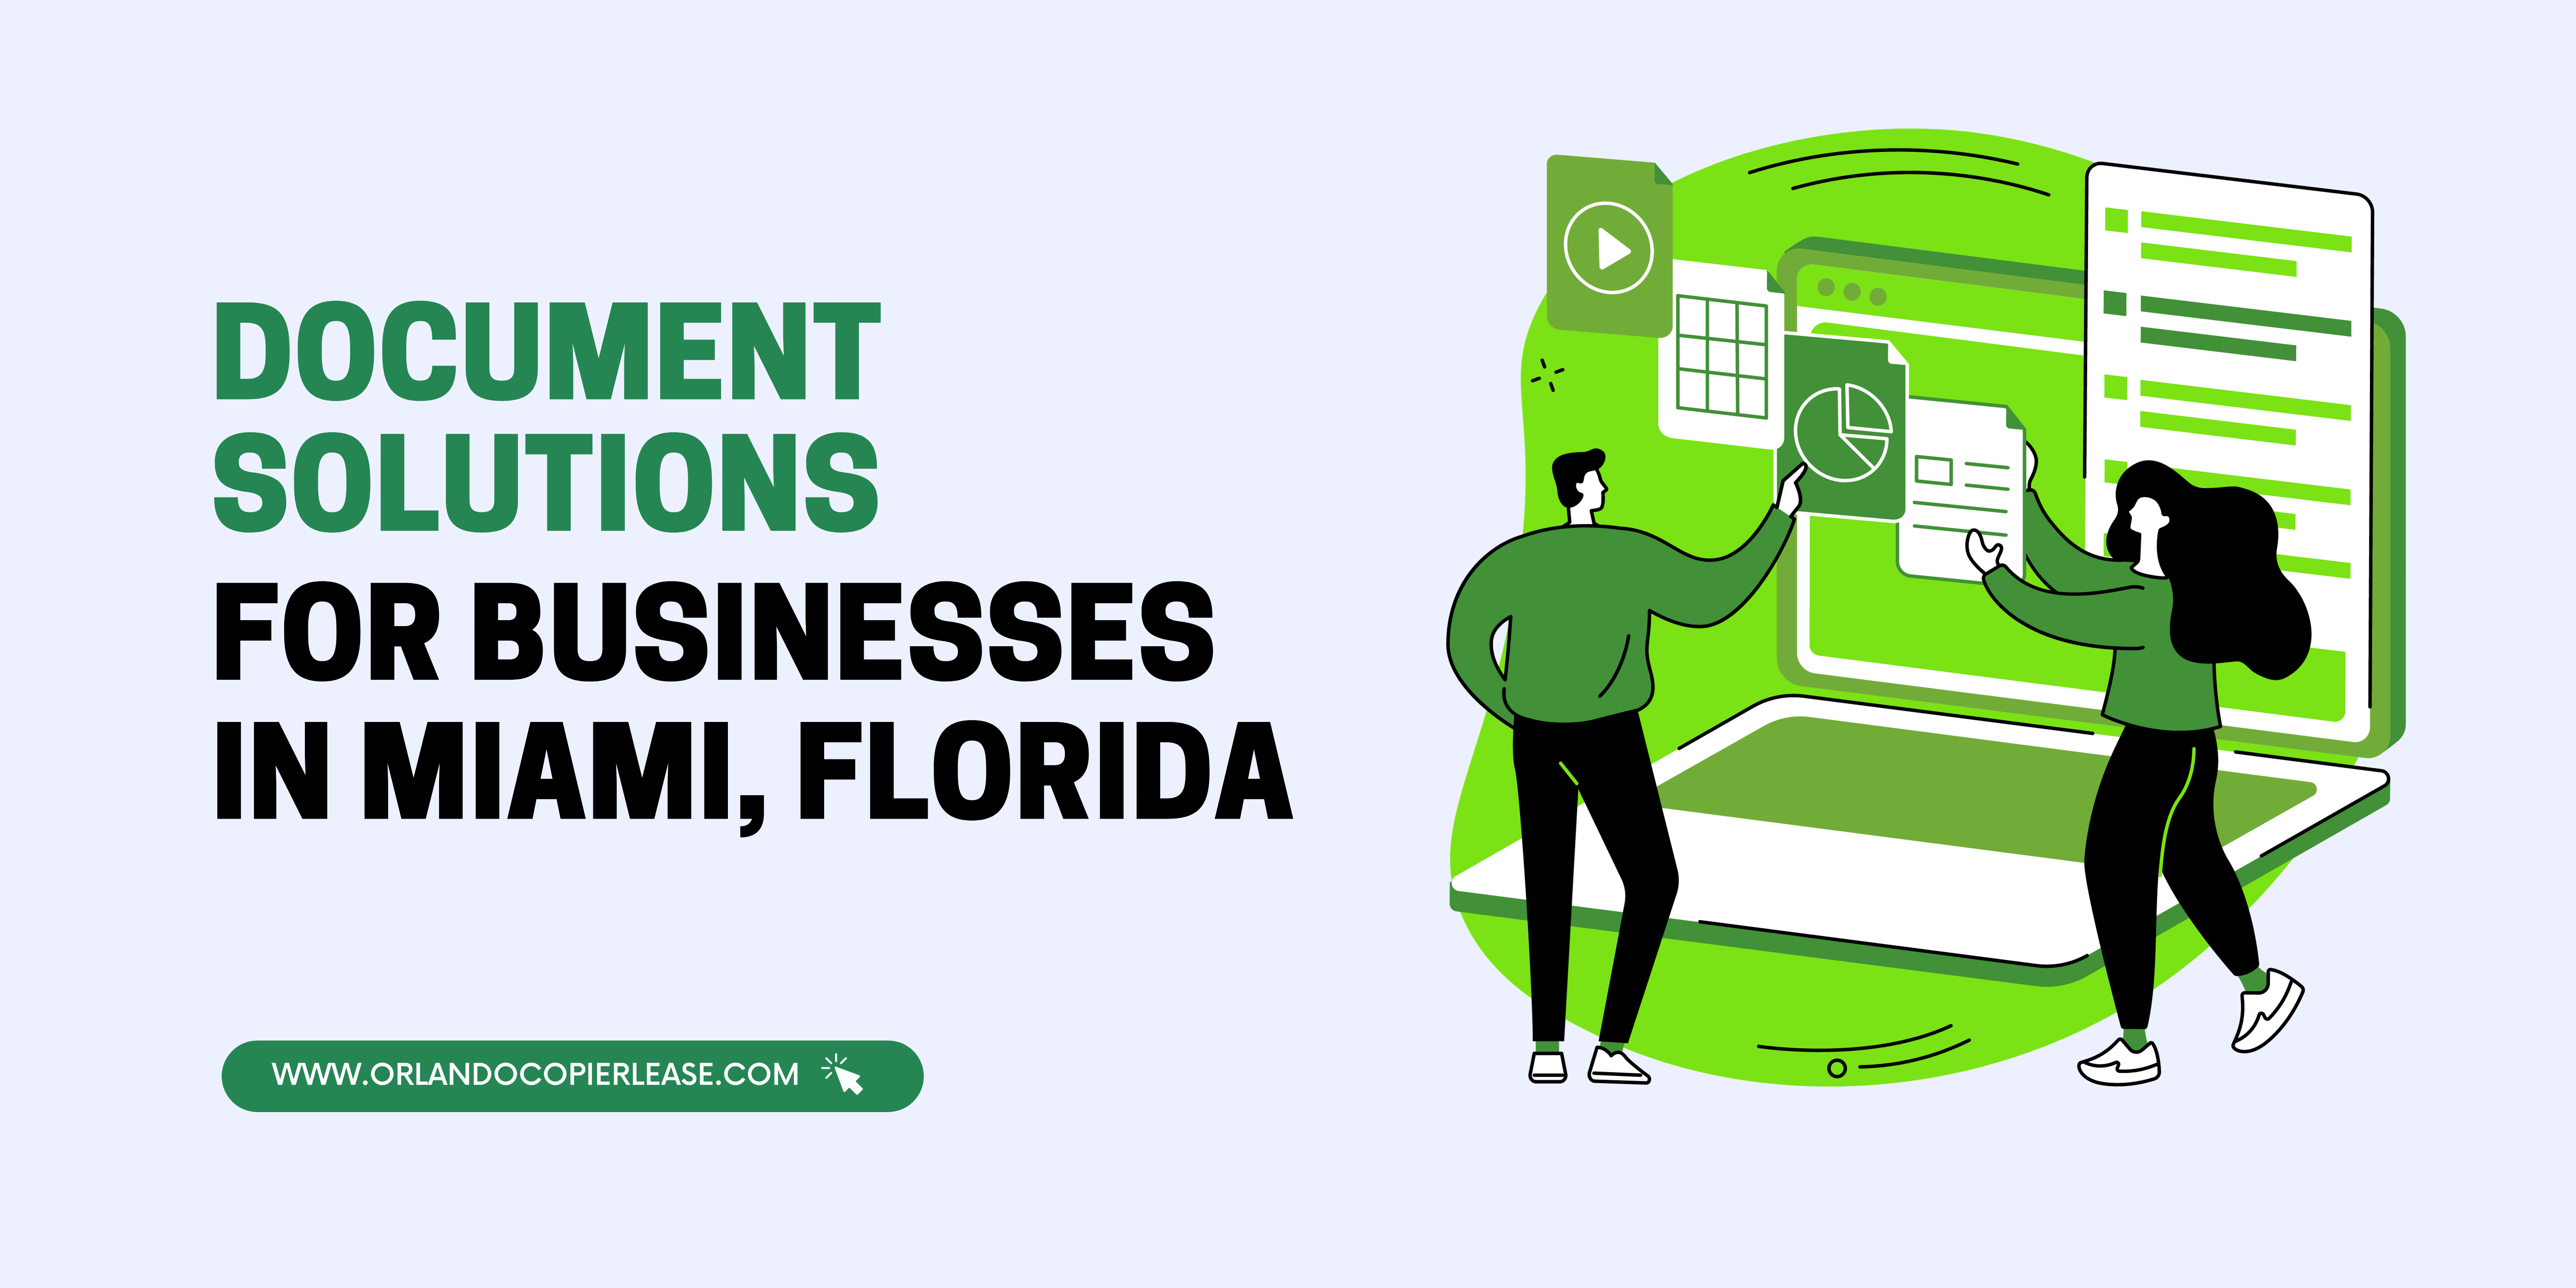 Document Solutions For Businesses in Miami, Florida